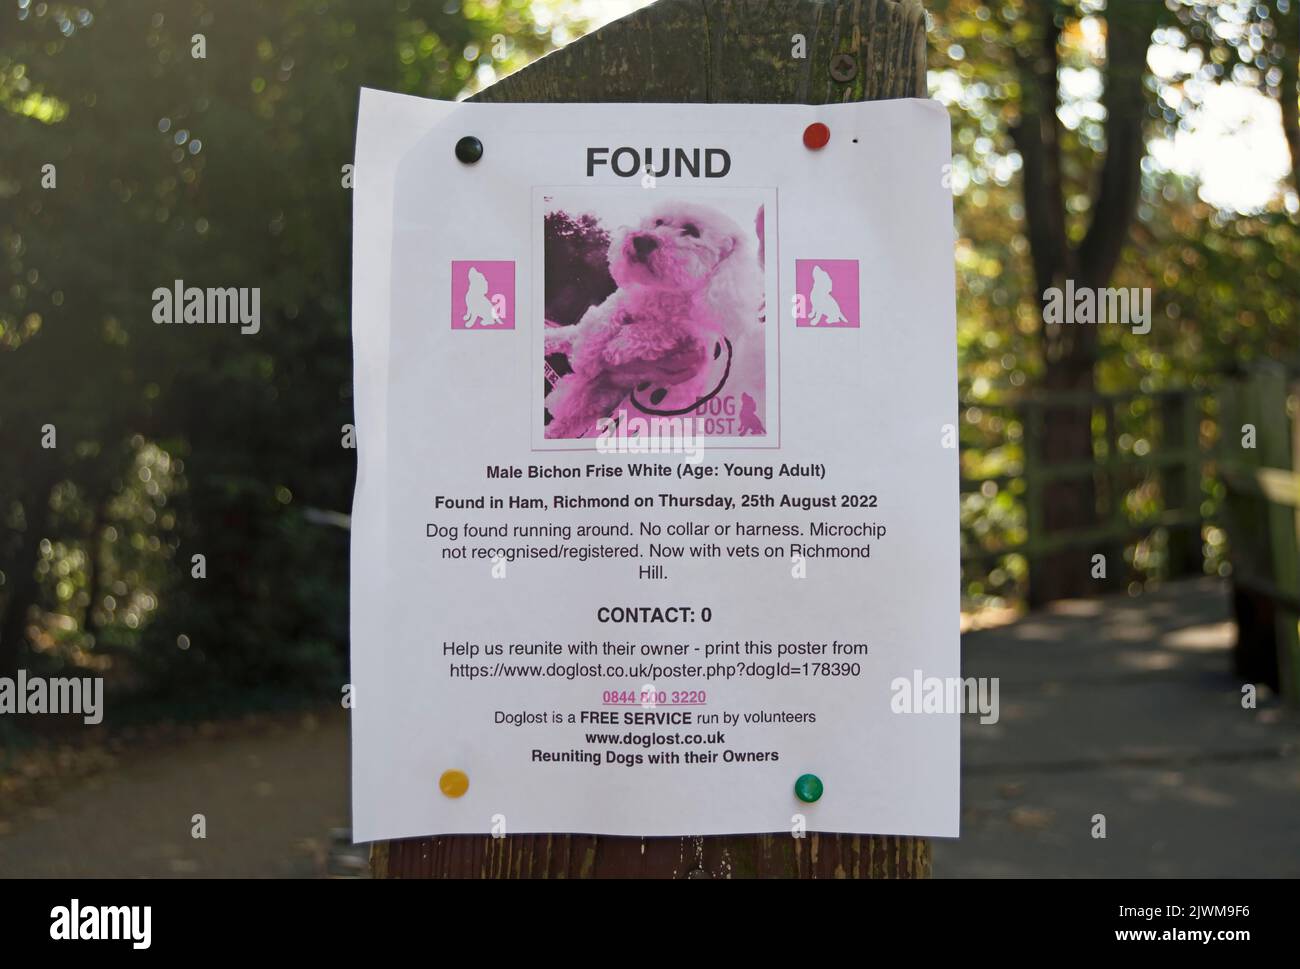 doglost poster regarding a found dog, a male bichon frise described as white but appearing as pink on the poster, in ham, surrey, england Stock Photo